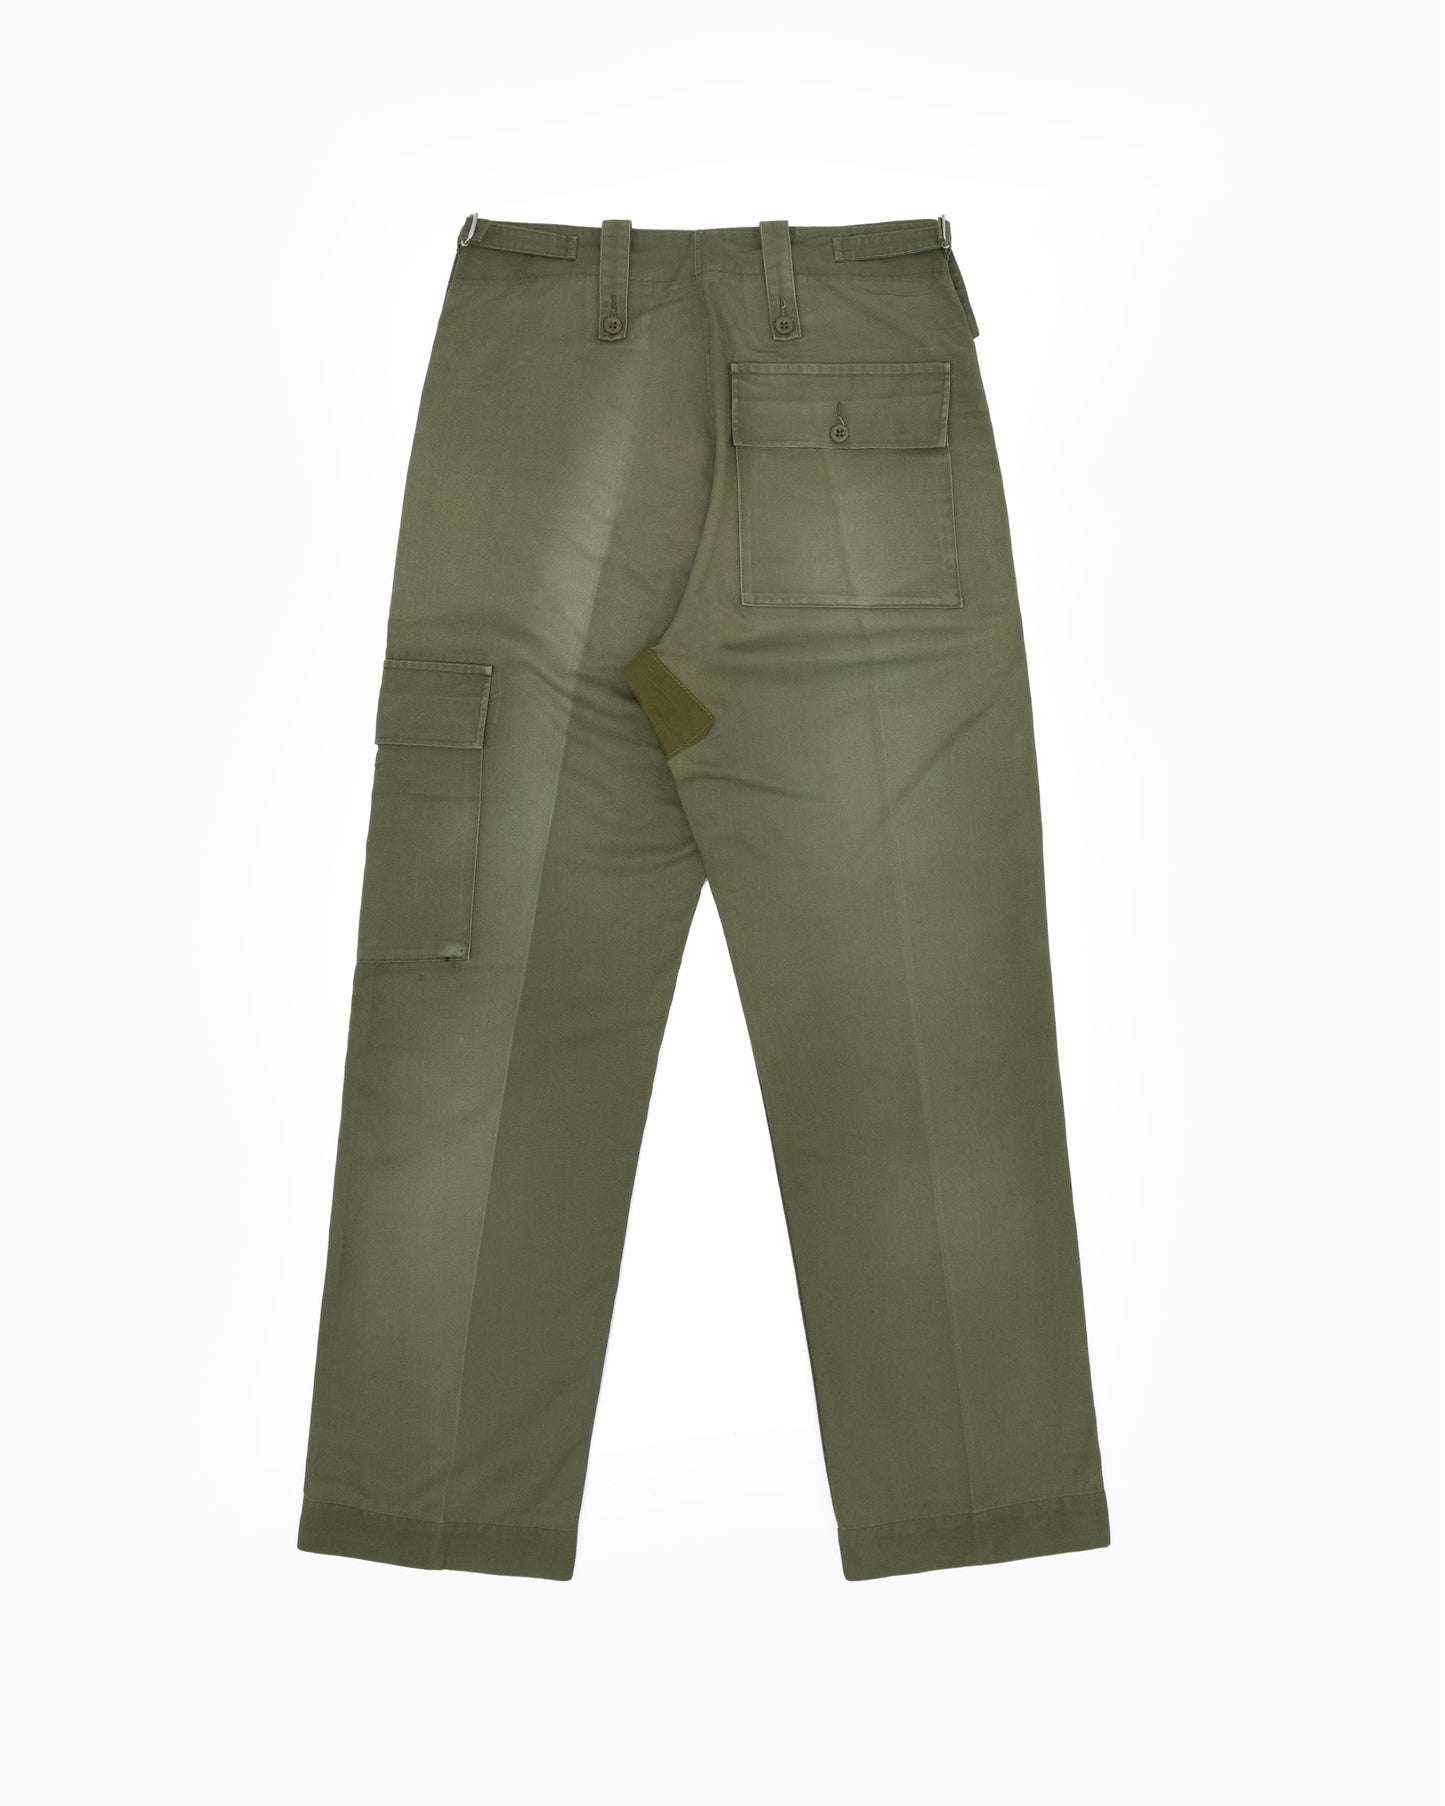 1970s US Army Fatigue Trousers